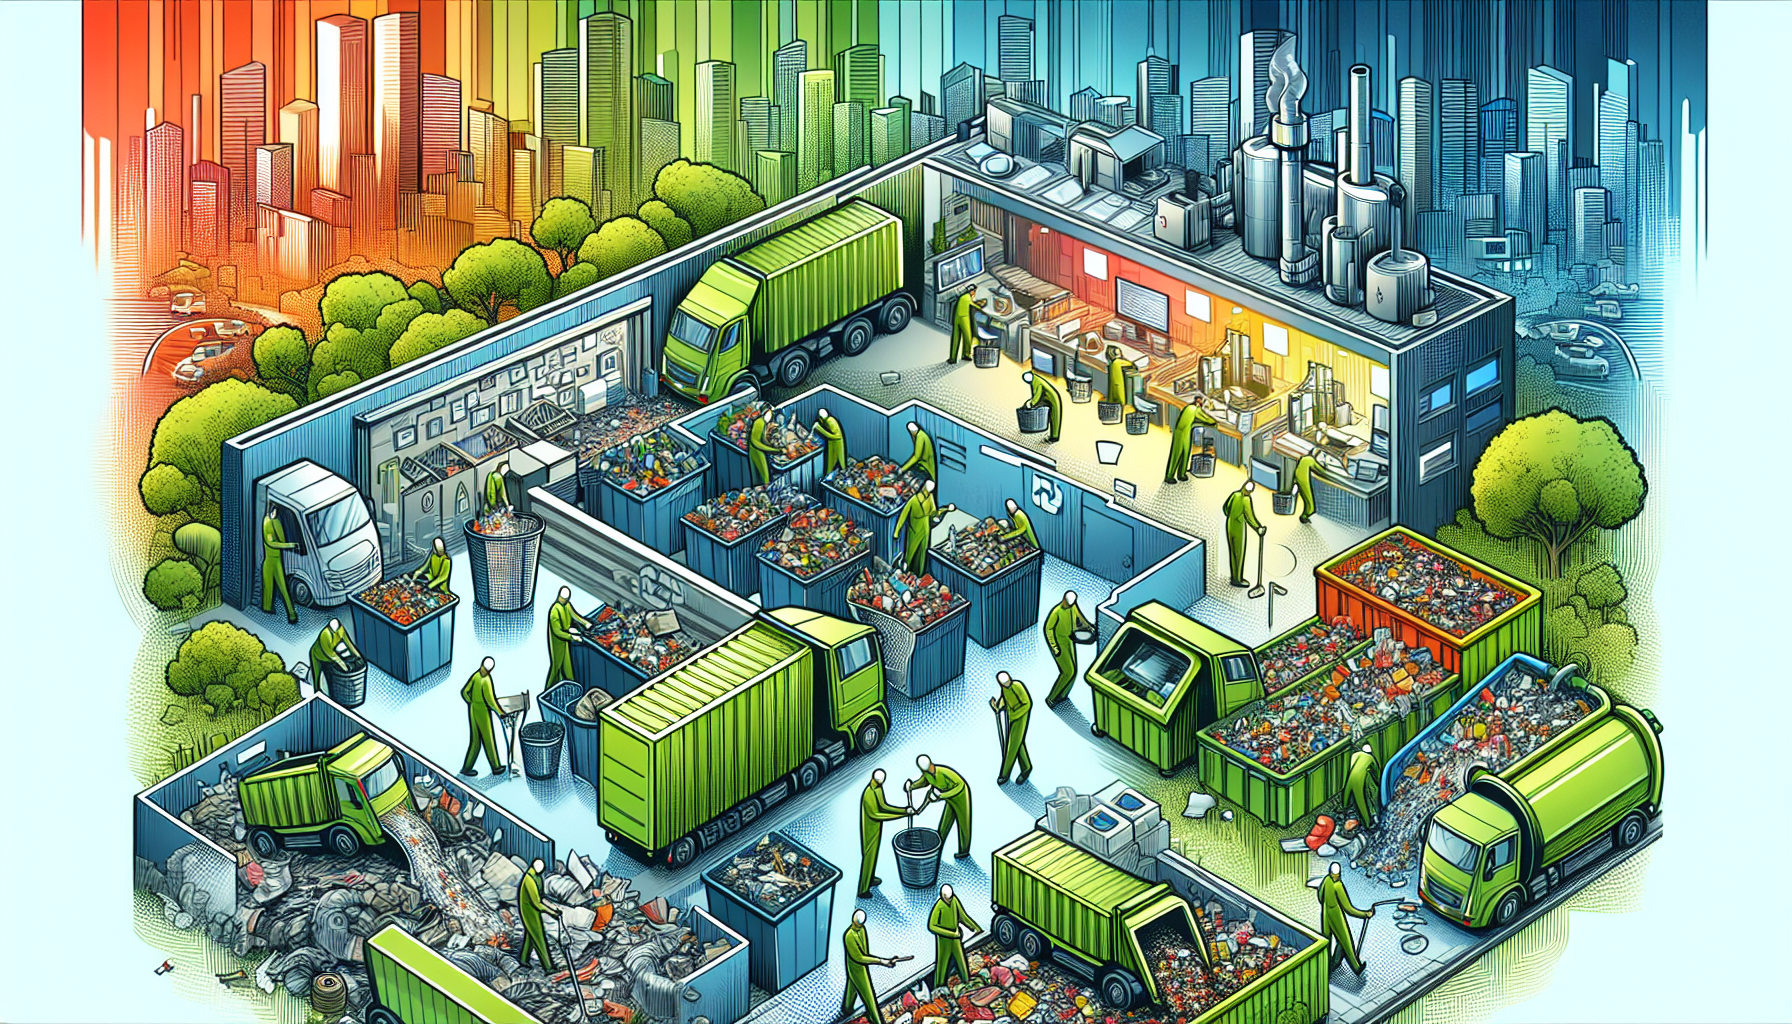 Illustration of waste management and recycling solutions